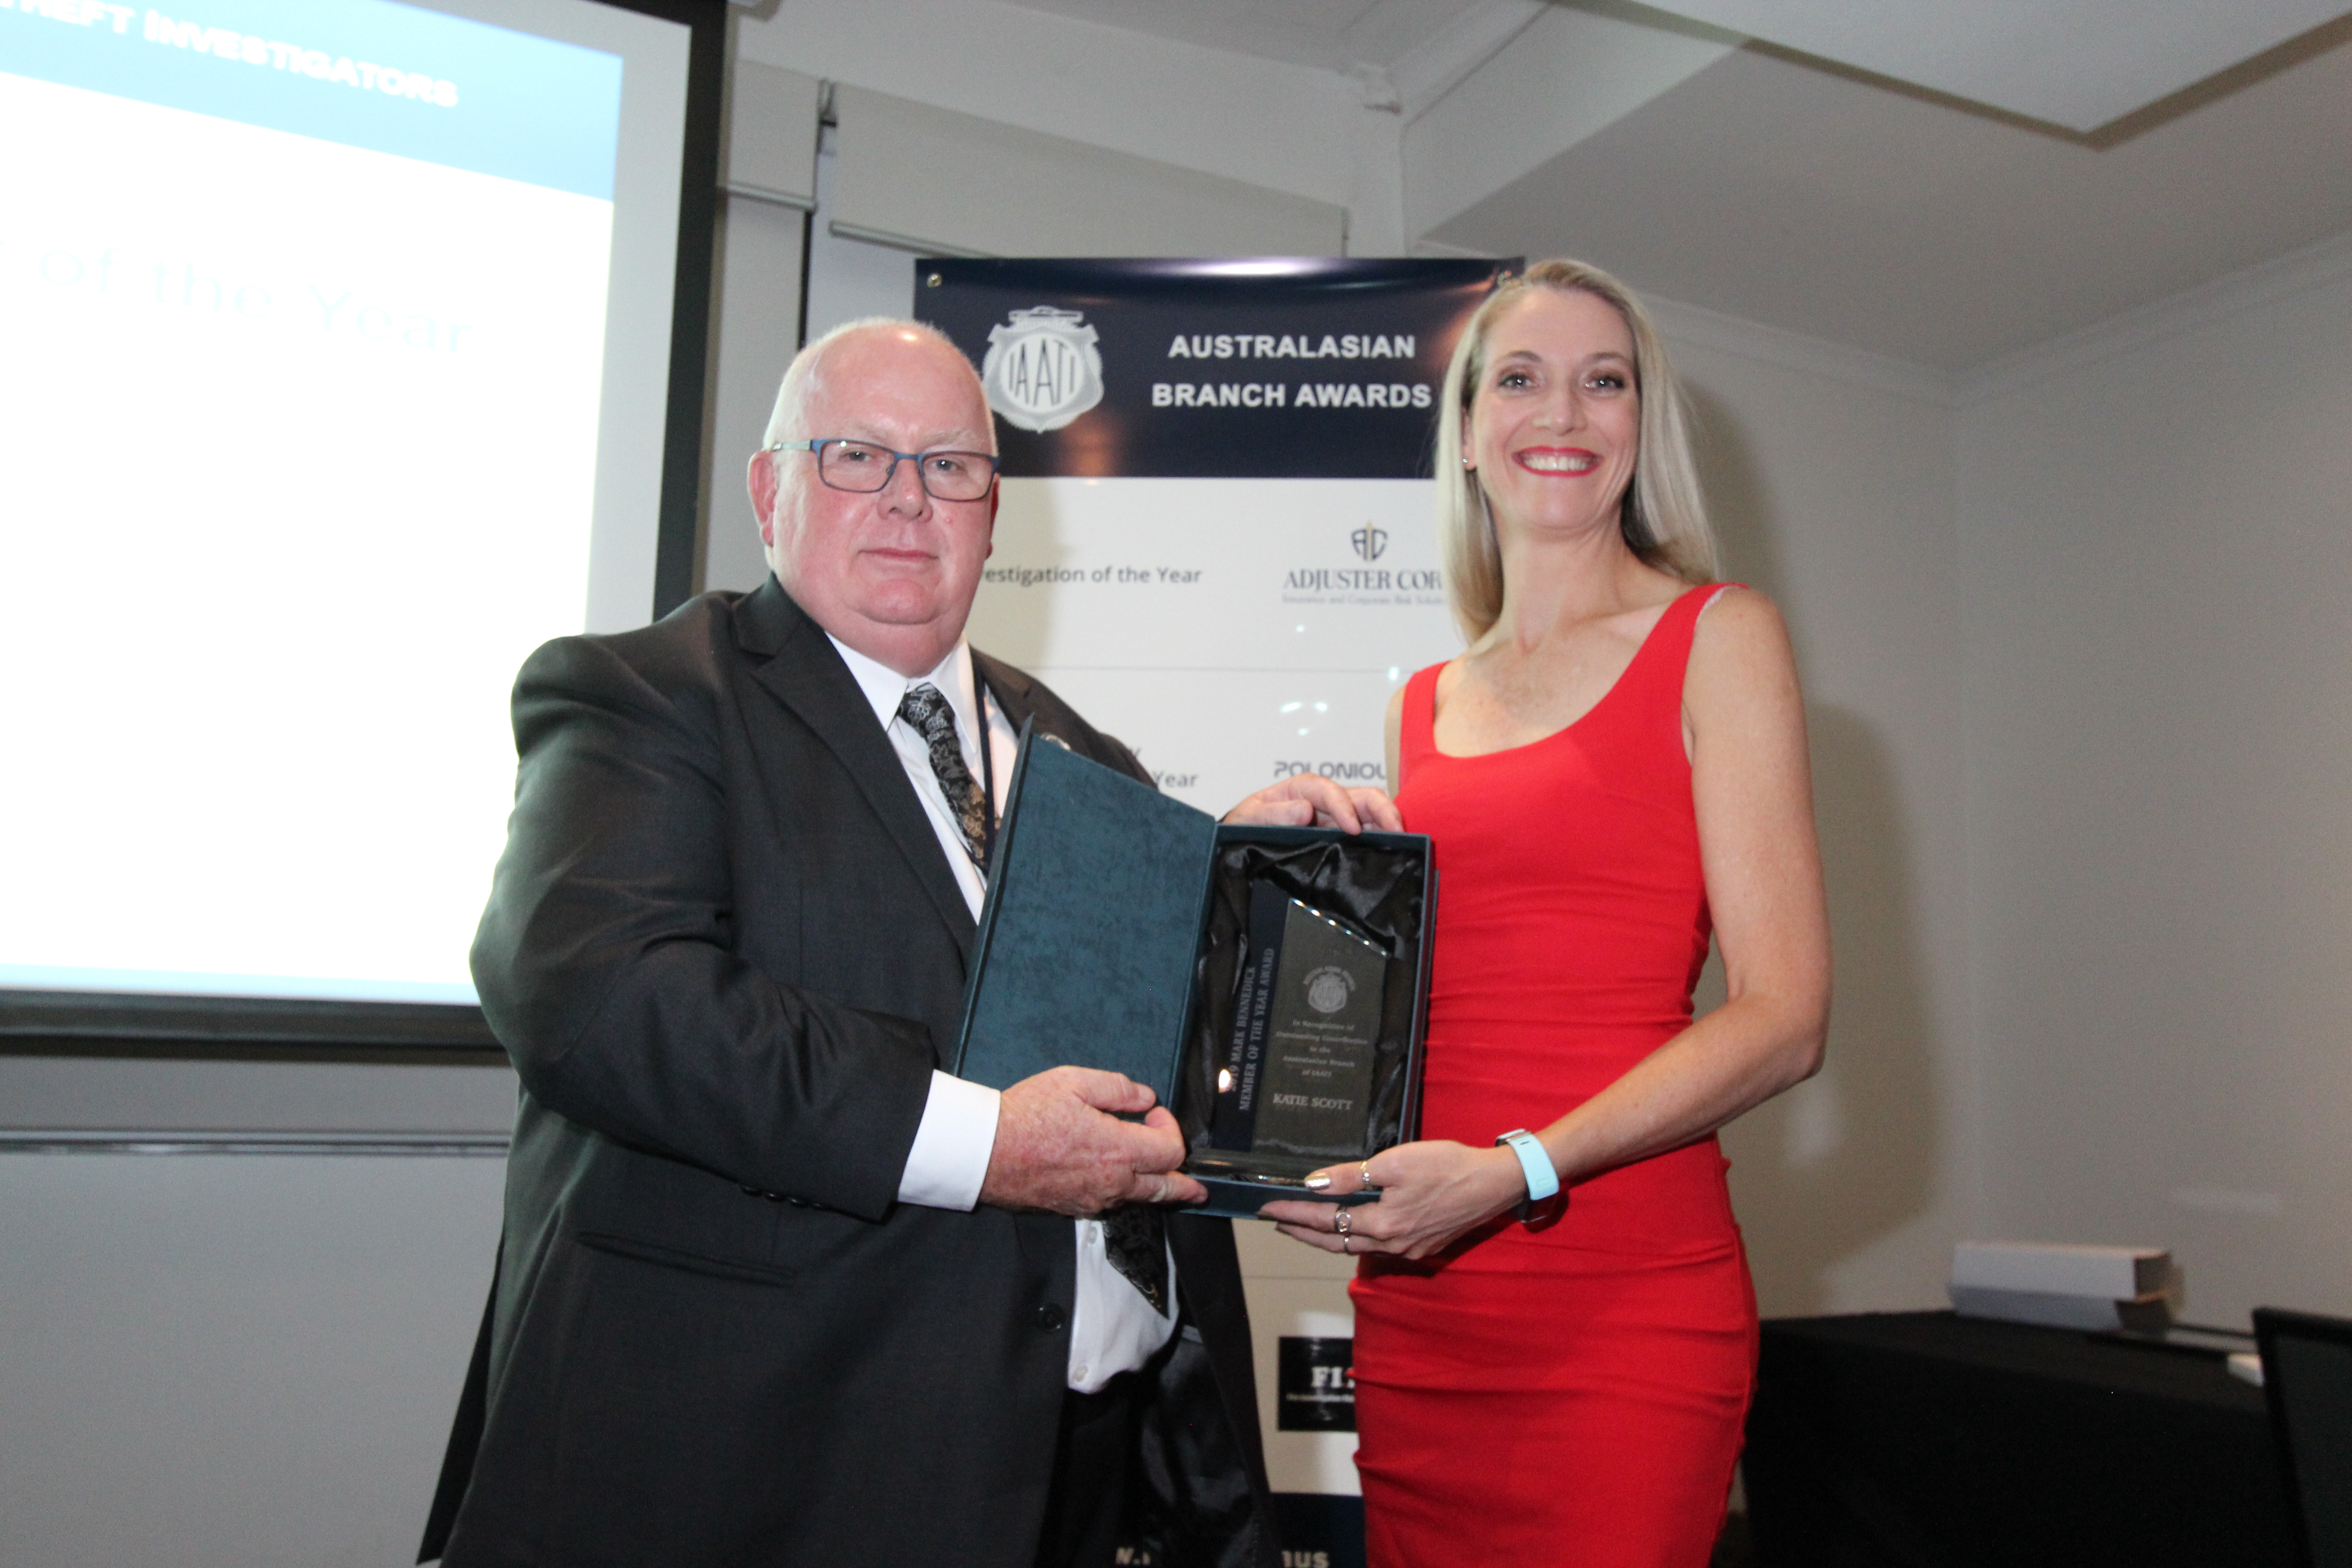 Australasian Branch President (left) and Katie Scott, 2019 Member of the Year recipient